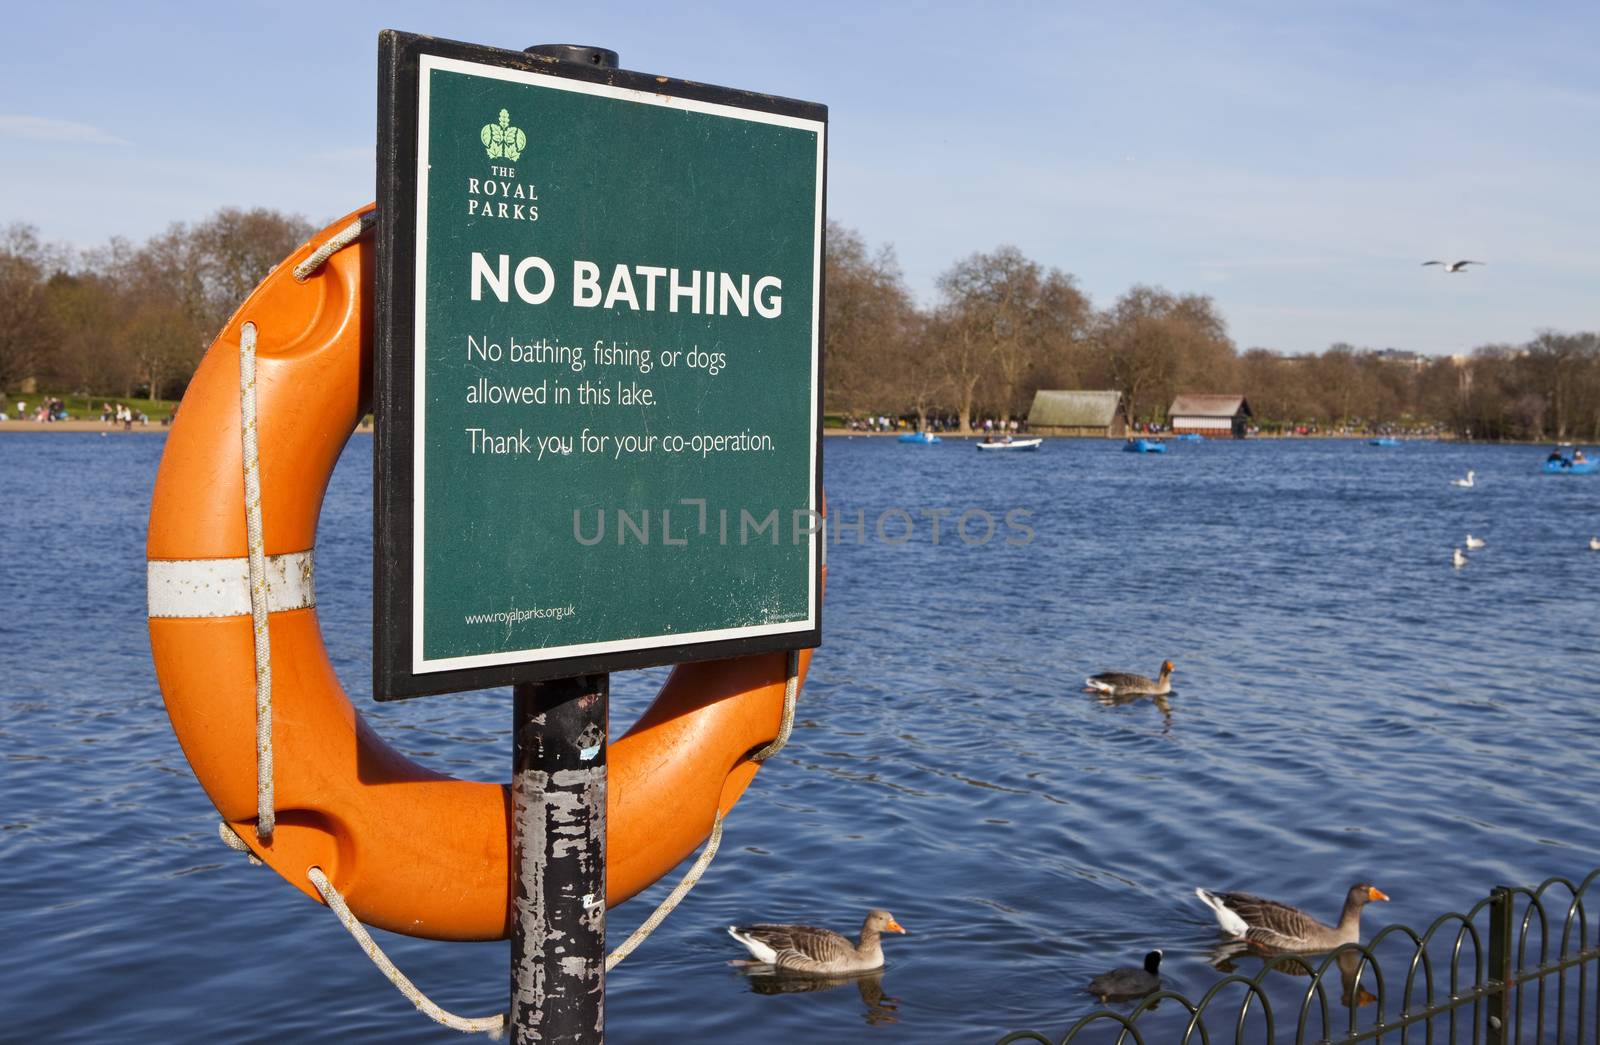 'No bathing' Sign at the Serpentine Lake in London's Hyde Park.